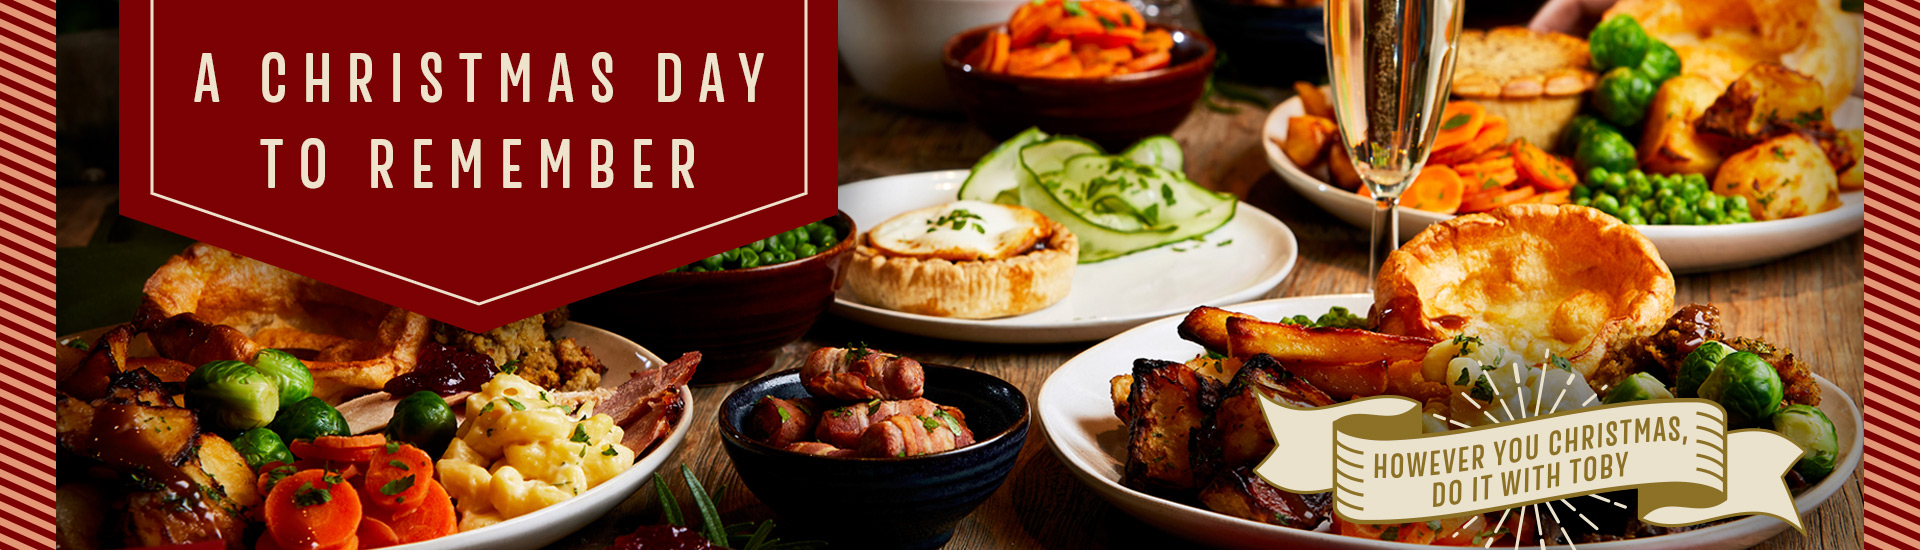 Christmas Day menu at Halfway House Toby Carvery